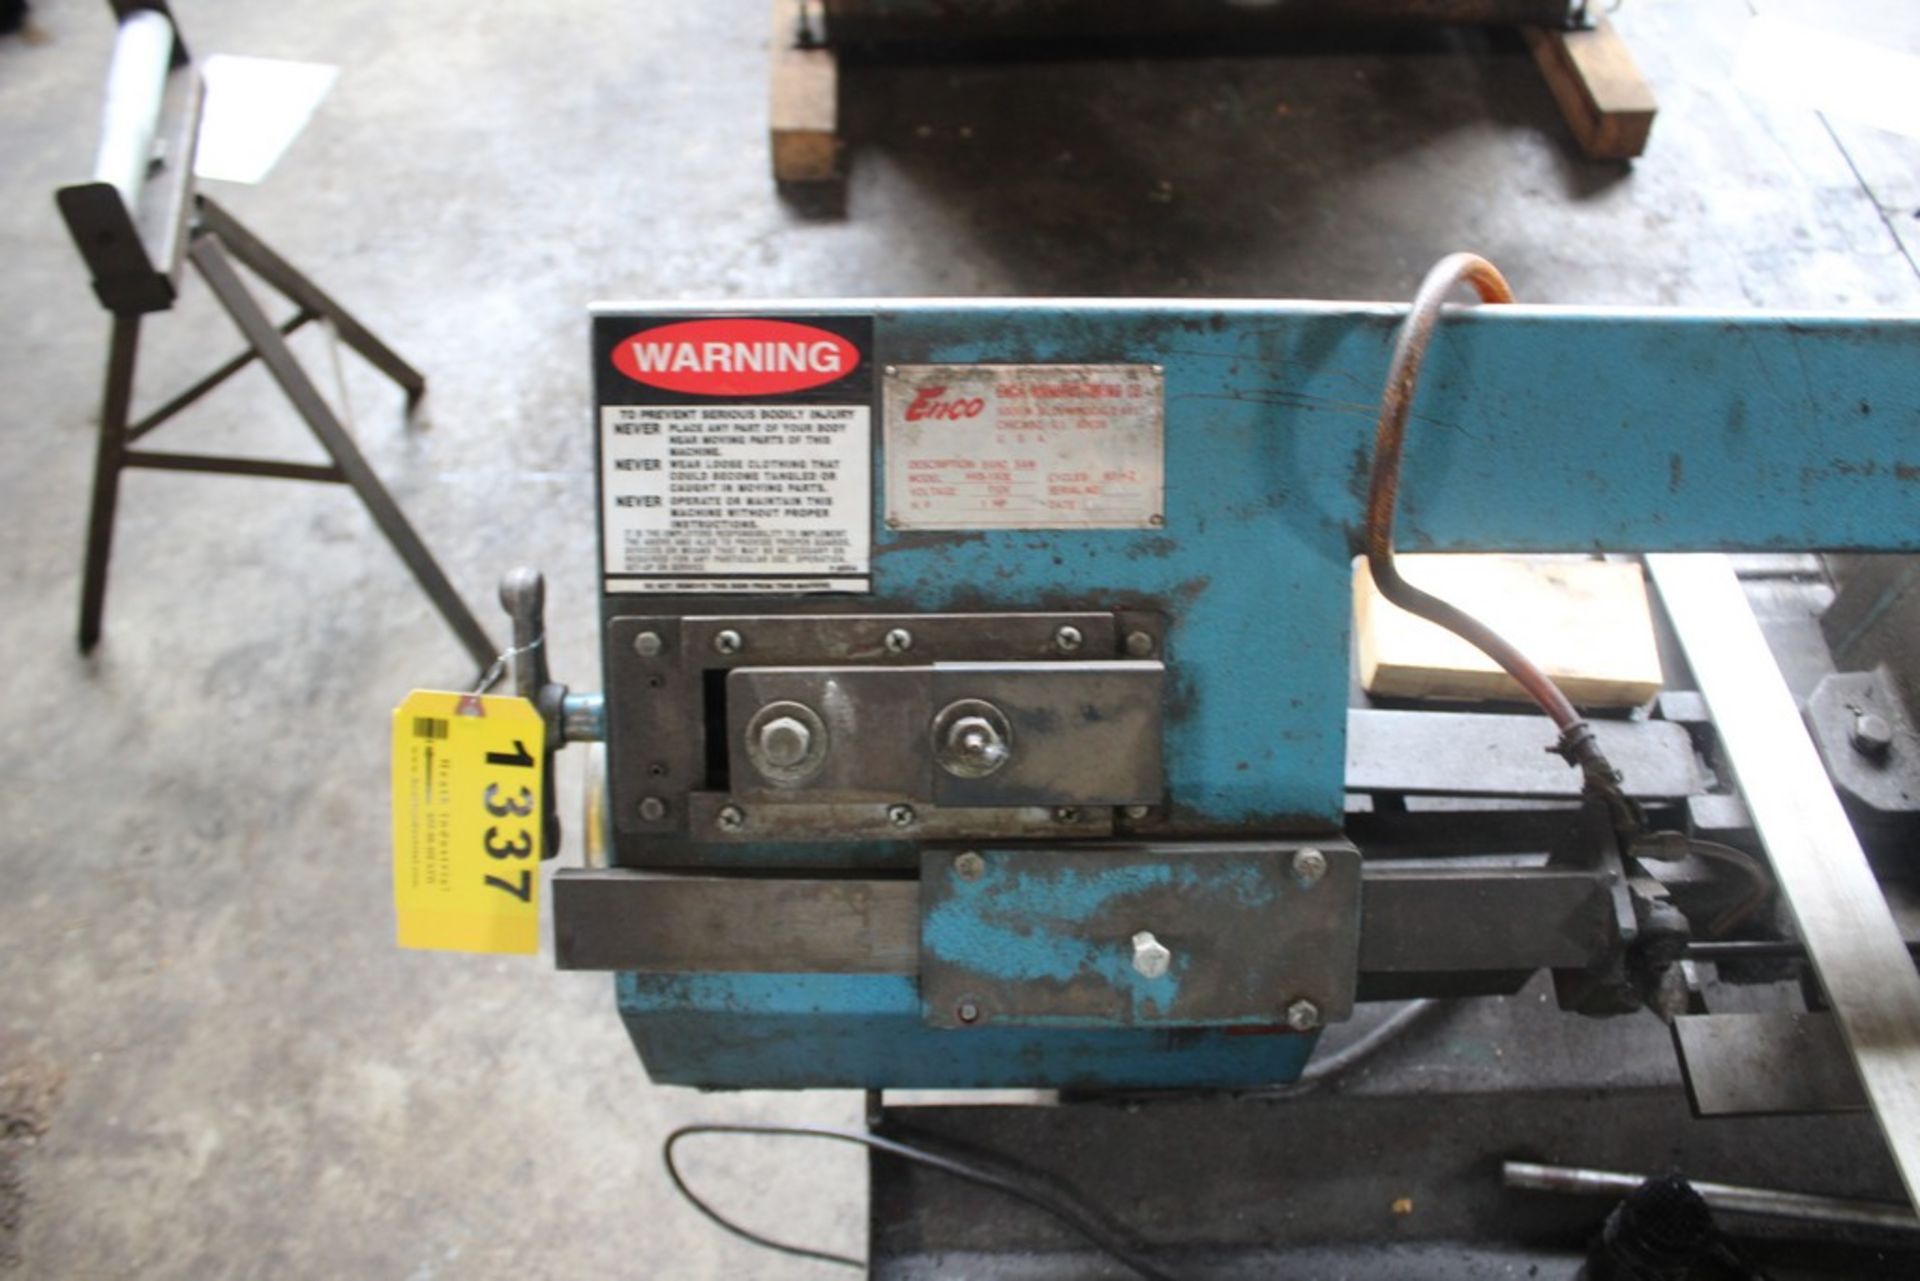 7" X 12" ENCO #HVB-180E HORIZONTAL BAND SAW (MANUAL), S/N 811348 (1988) EQUIPPED WITH VISE, COOLANT, - Image 3 of 3